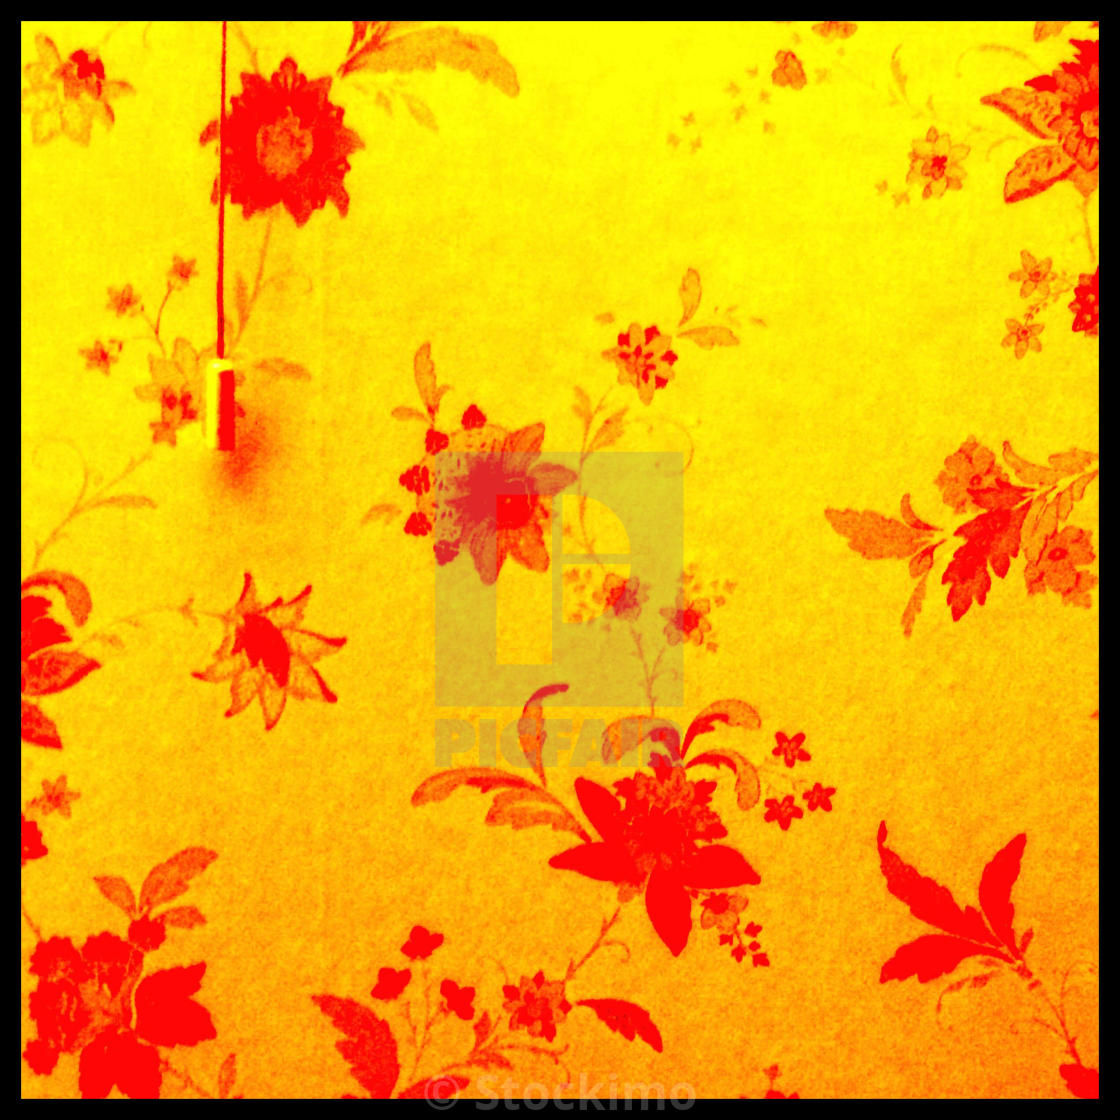 Brightly Coloured Floral Retro Wallpaper And Wall Light - Visual Arts - HD Wallpaper 